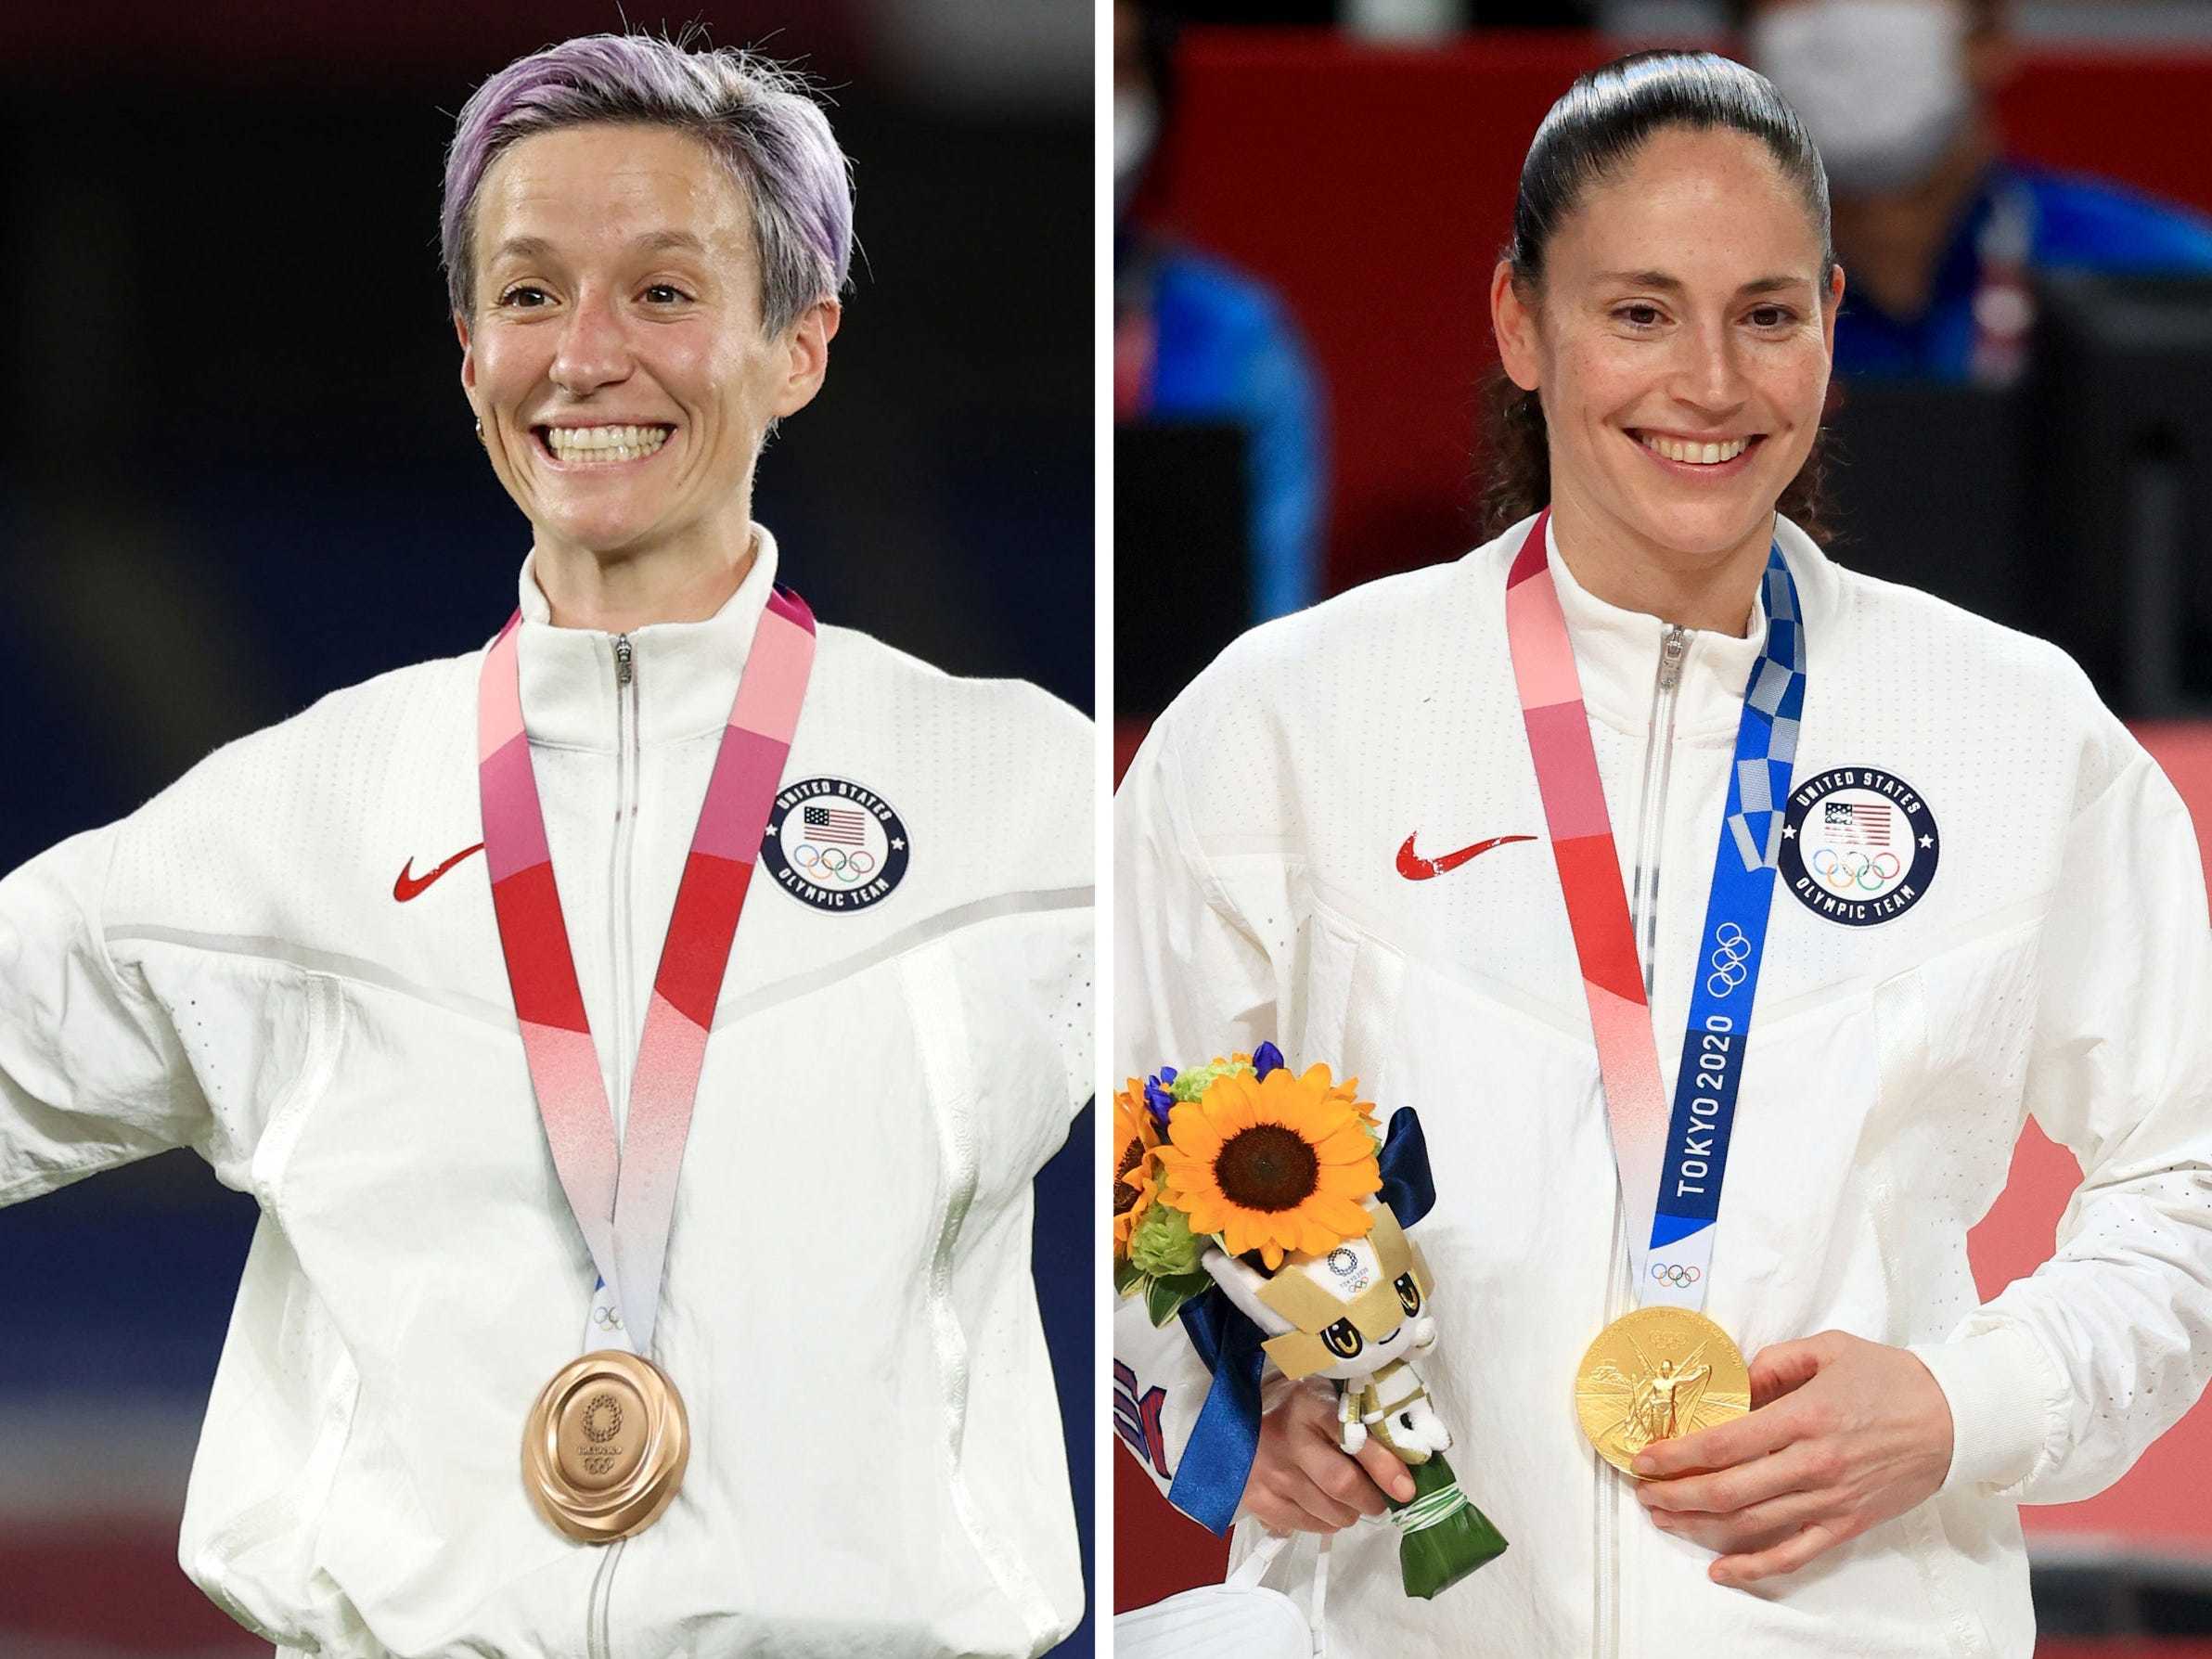 Megan Rapinoe poses with her bronze medal from Tokyo, and Sue Bird poses with her gold medal from Tokyo.